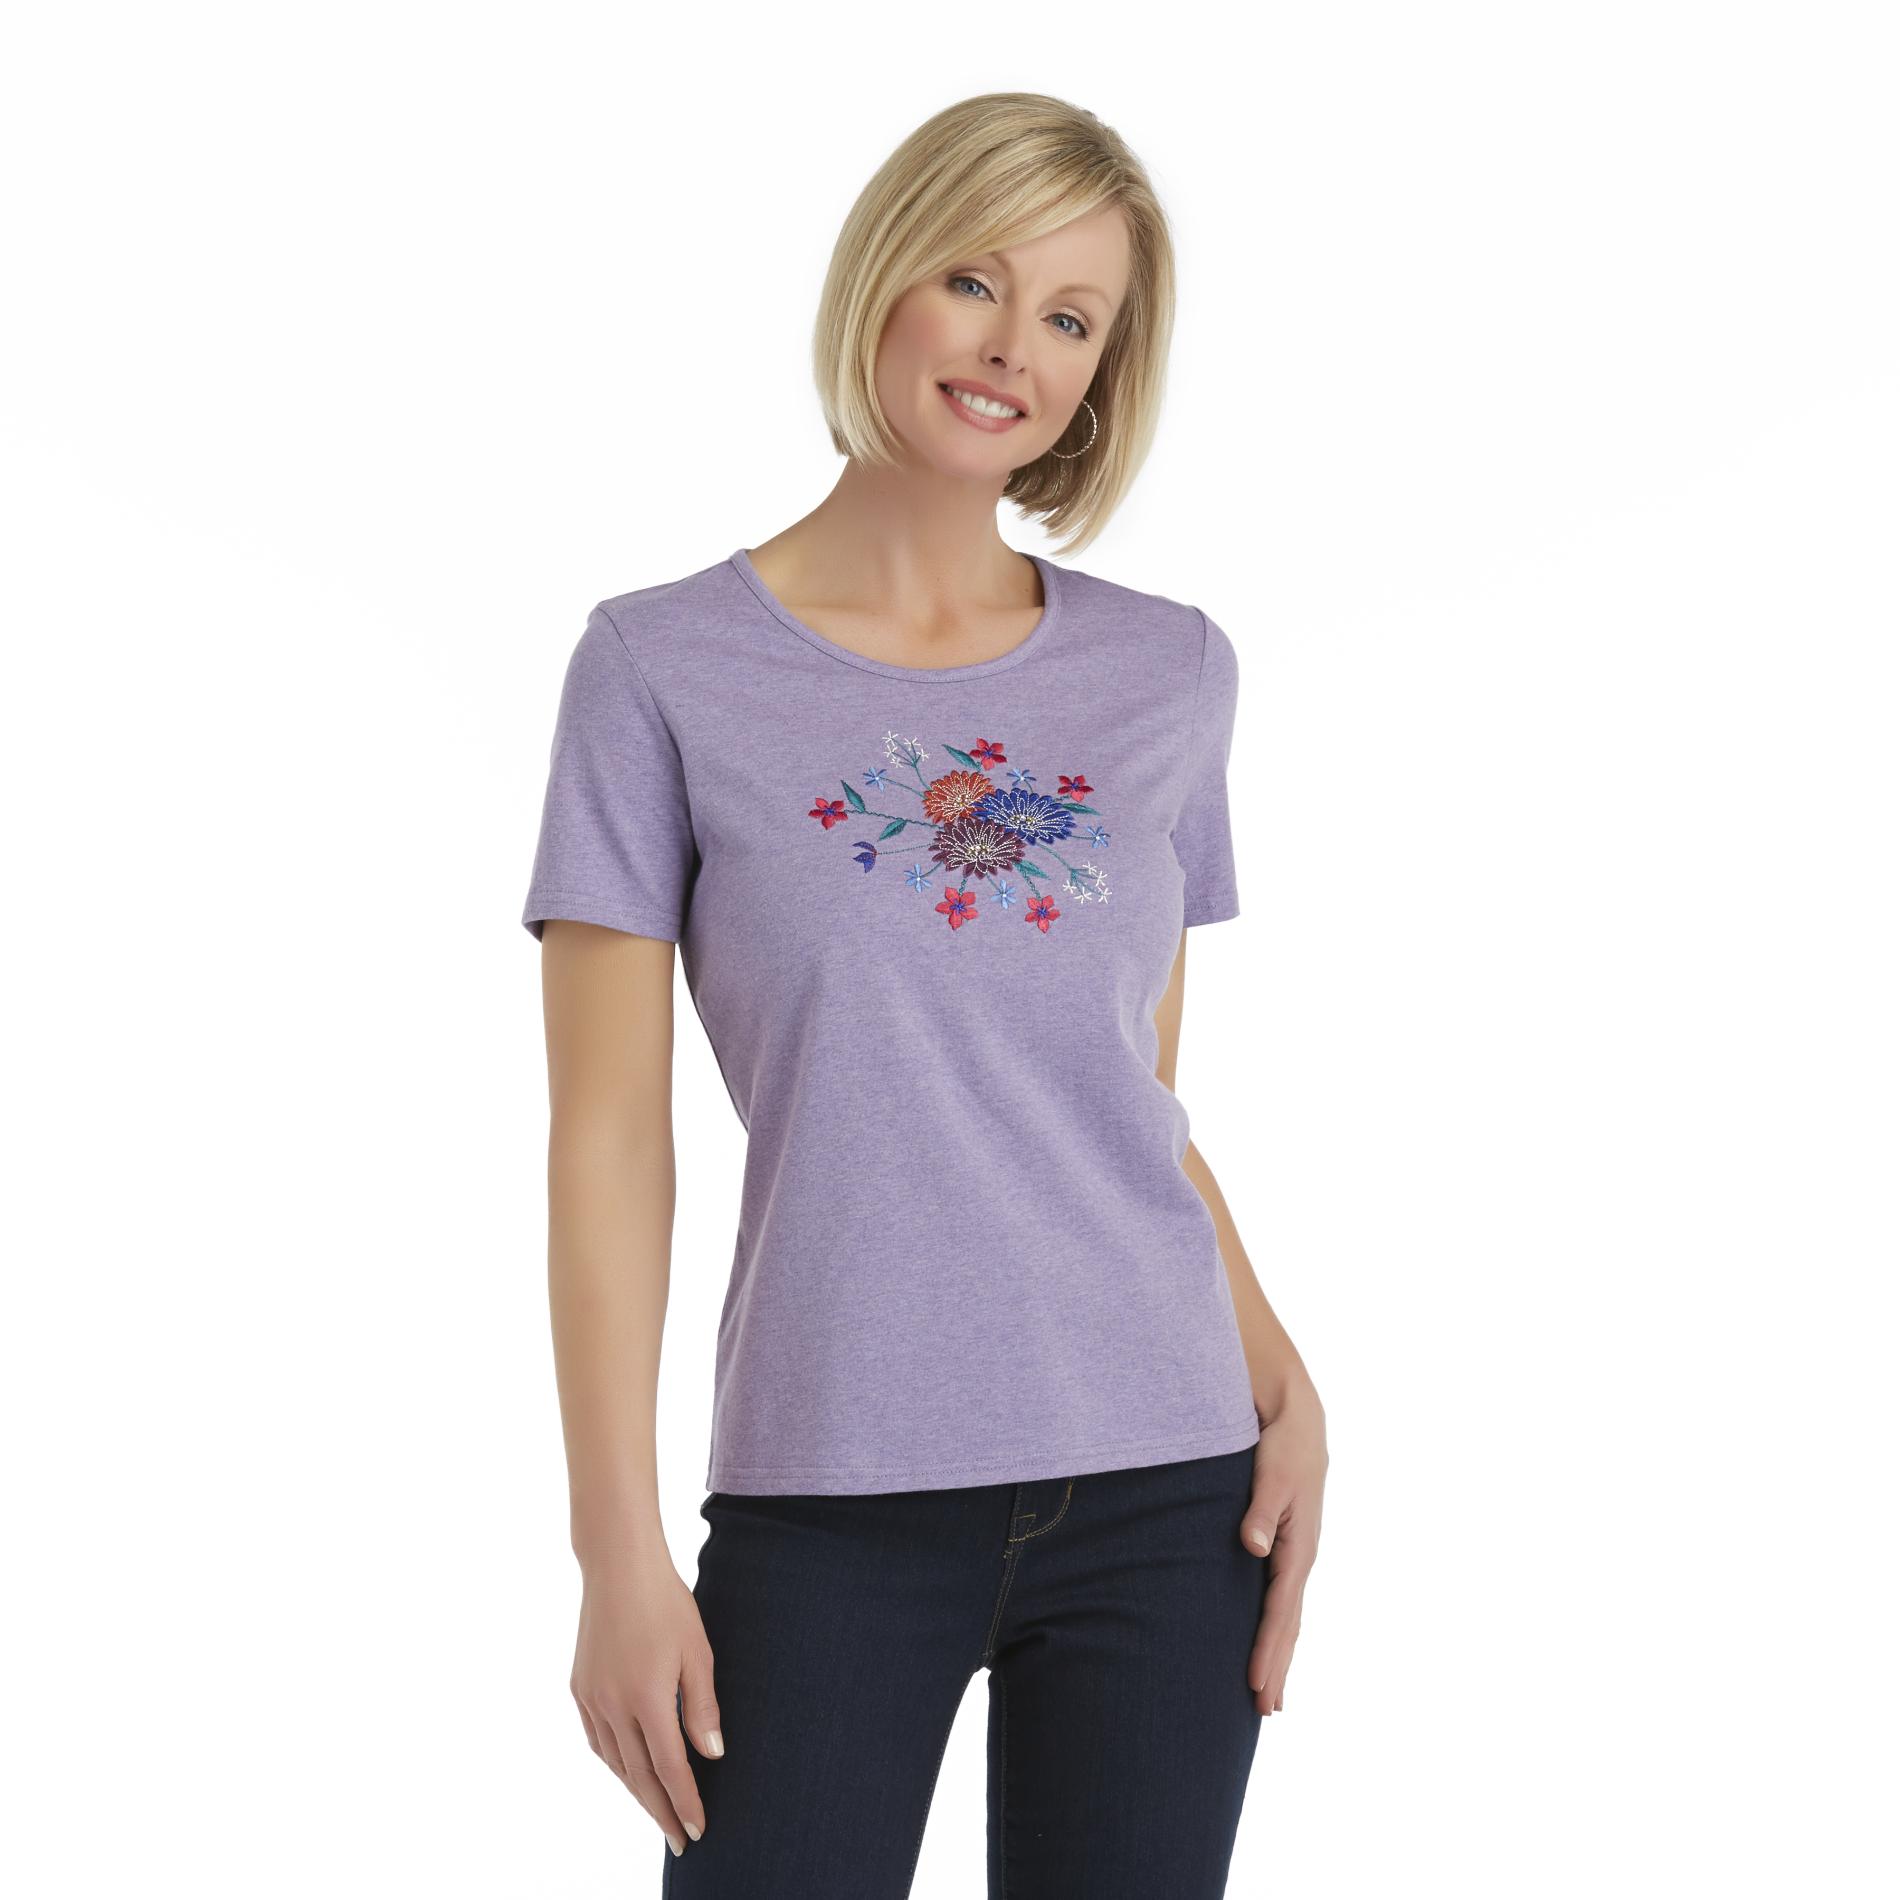 Basic Editions Women's Embellished T-Shirt - Floral